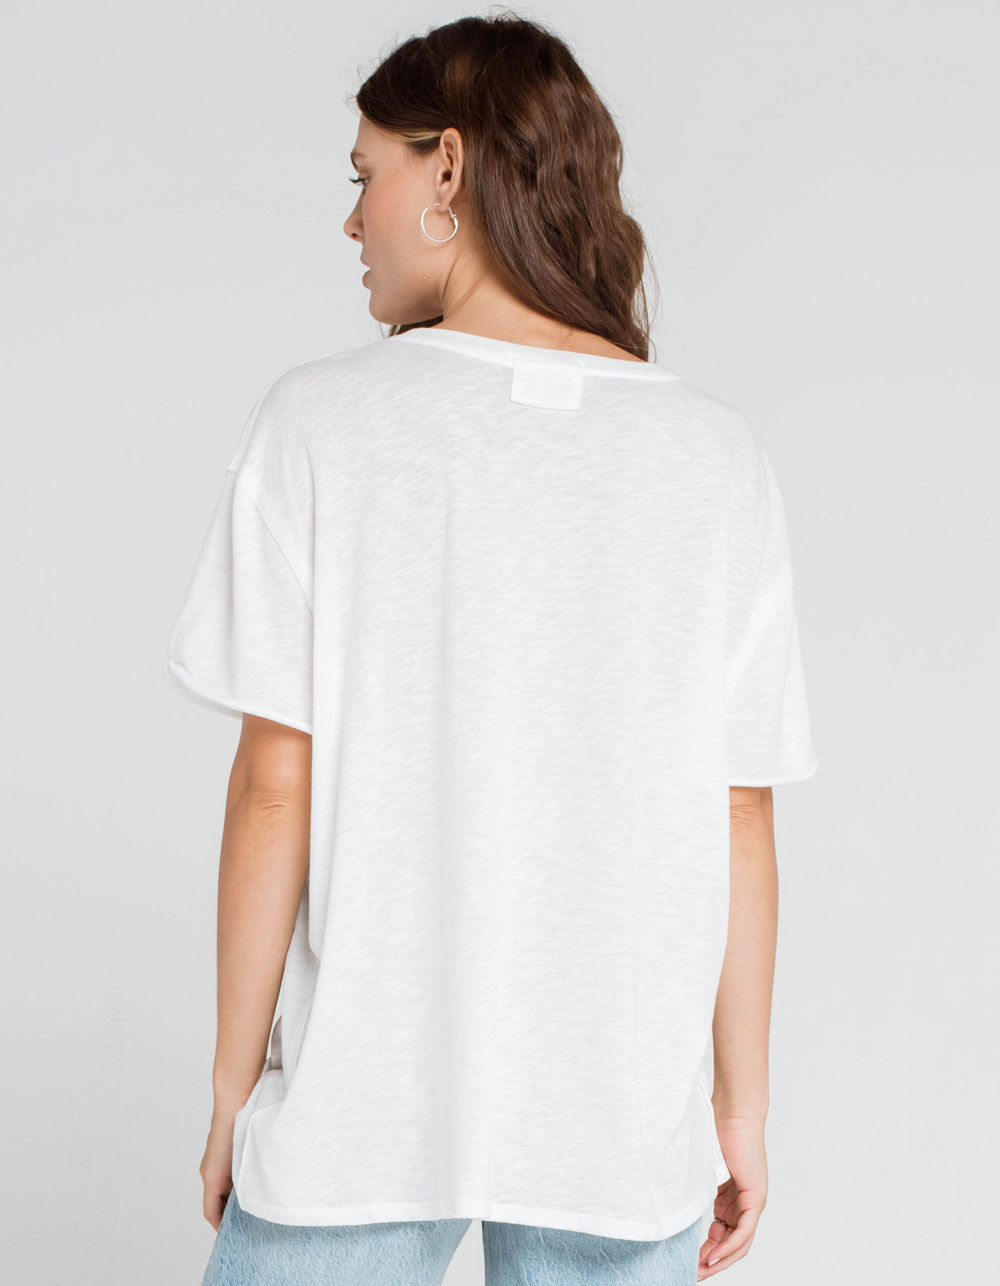 FREE PEOPLE Clarity Womens White Ringer Tee - WHITE | Tillys